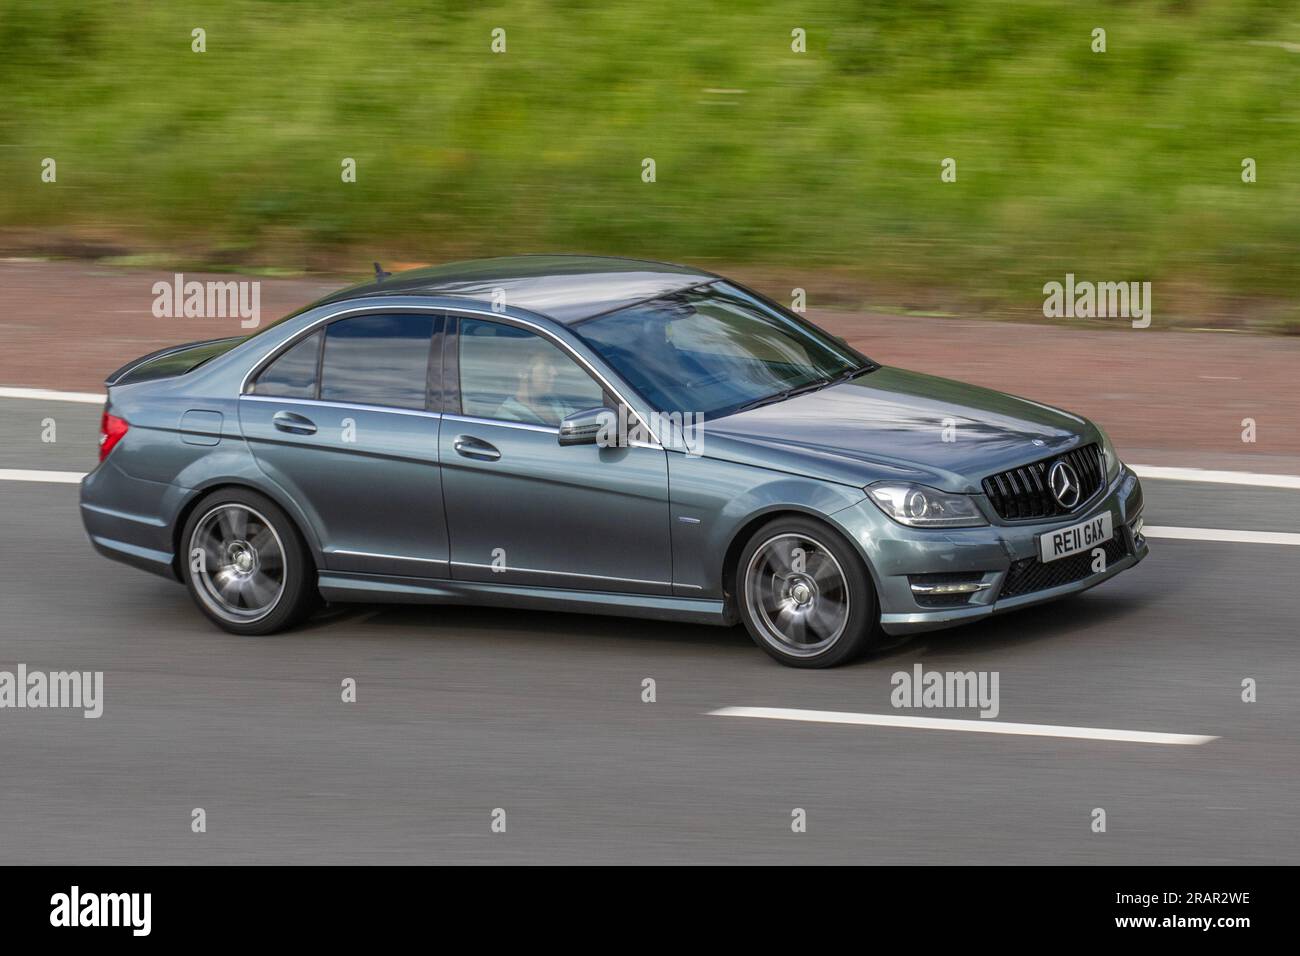 2011 Grey Mercedes-Benz C220 Sport CDI Blueeffi-C, A C220 Cdi Blueefficiency 7G-Tronic Auto Start/Stop saloon Car Diesel 2143 cc; travelling at speed on the M6 motorway in Greater Manchester, UK Stock Photo